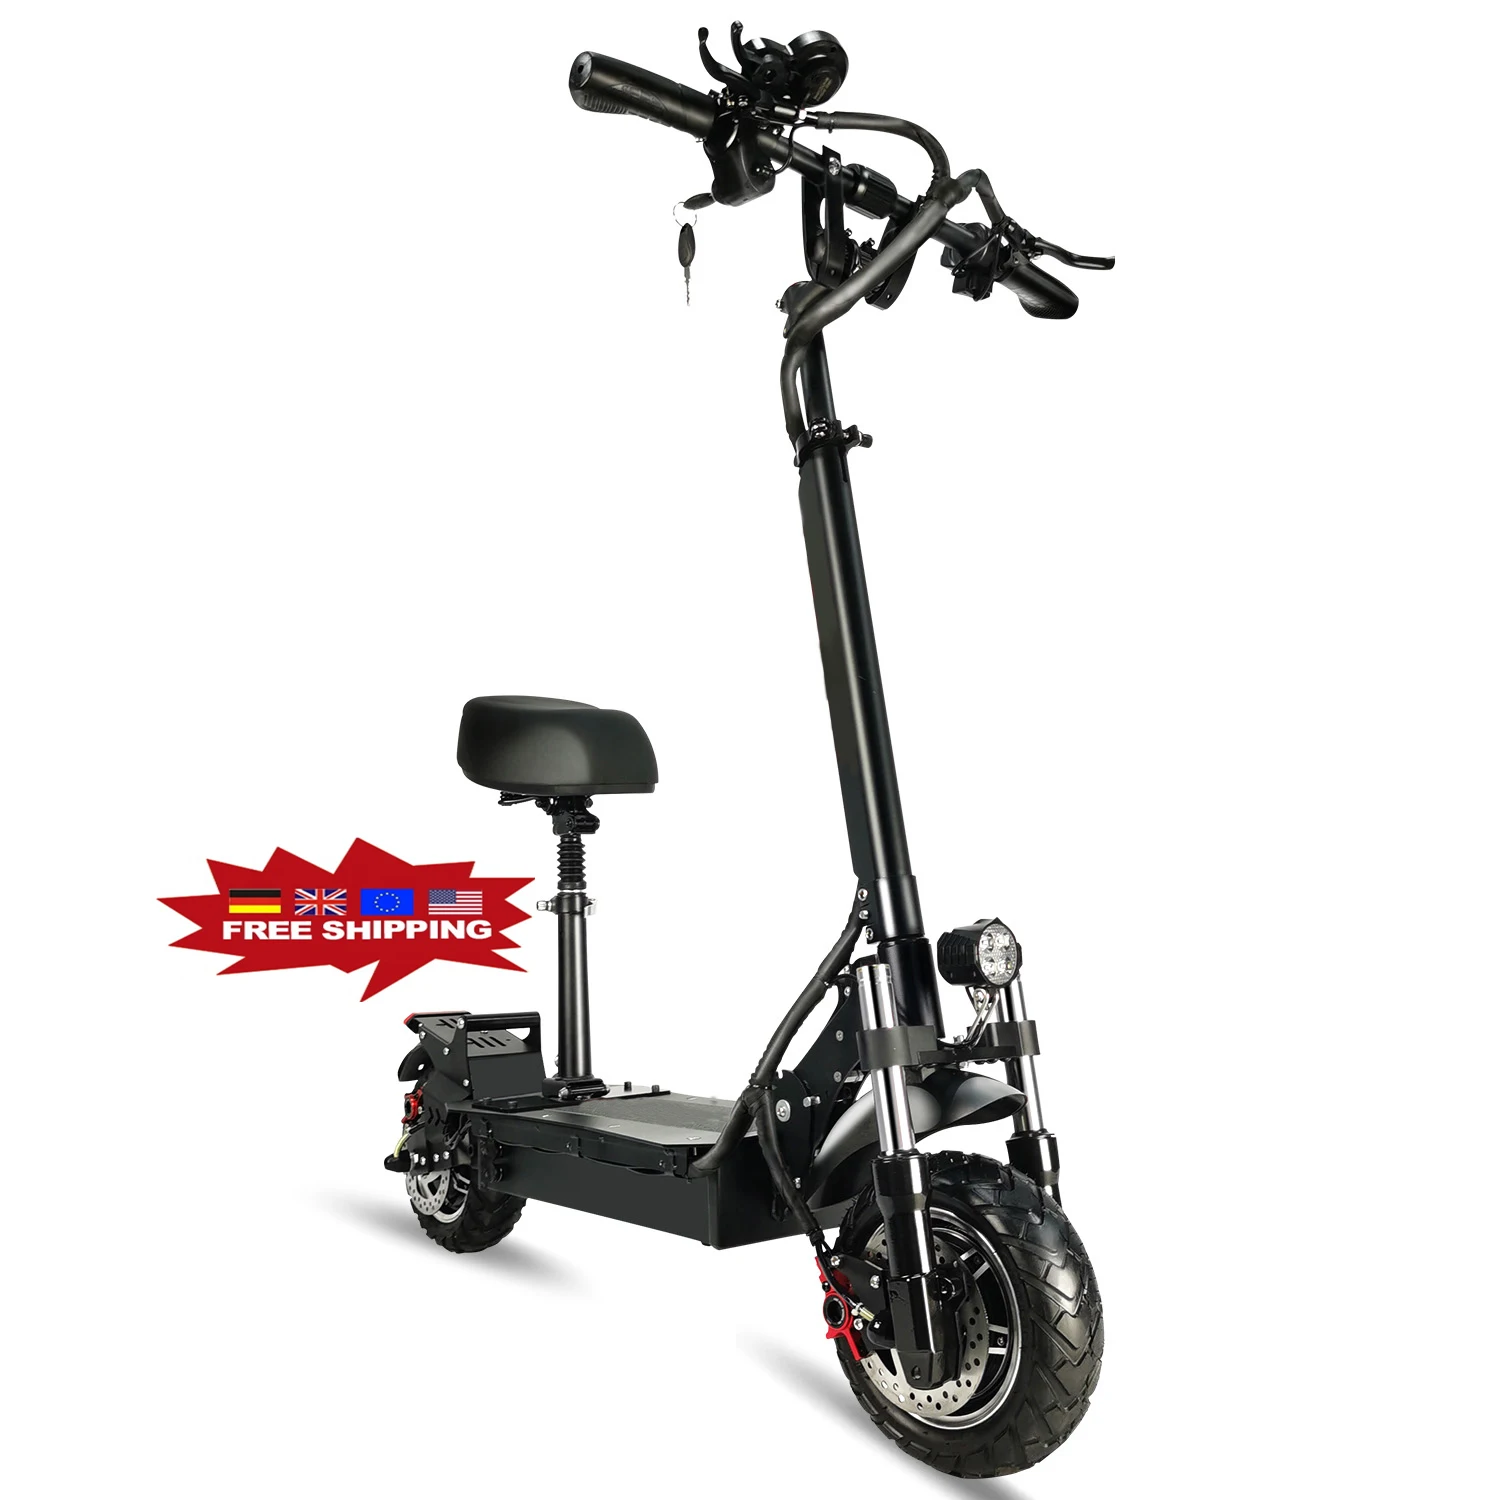 

News 2021 Folding Electric Scooter EU USA Warehouse 60v 27ah Adults Electric Scooter Freeing Shipping with seat